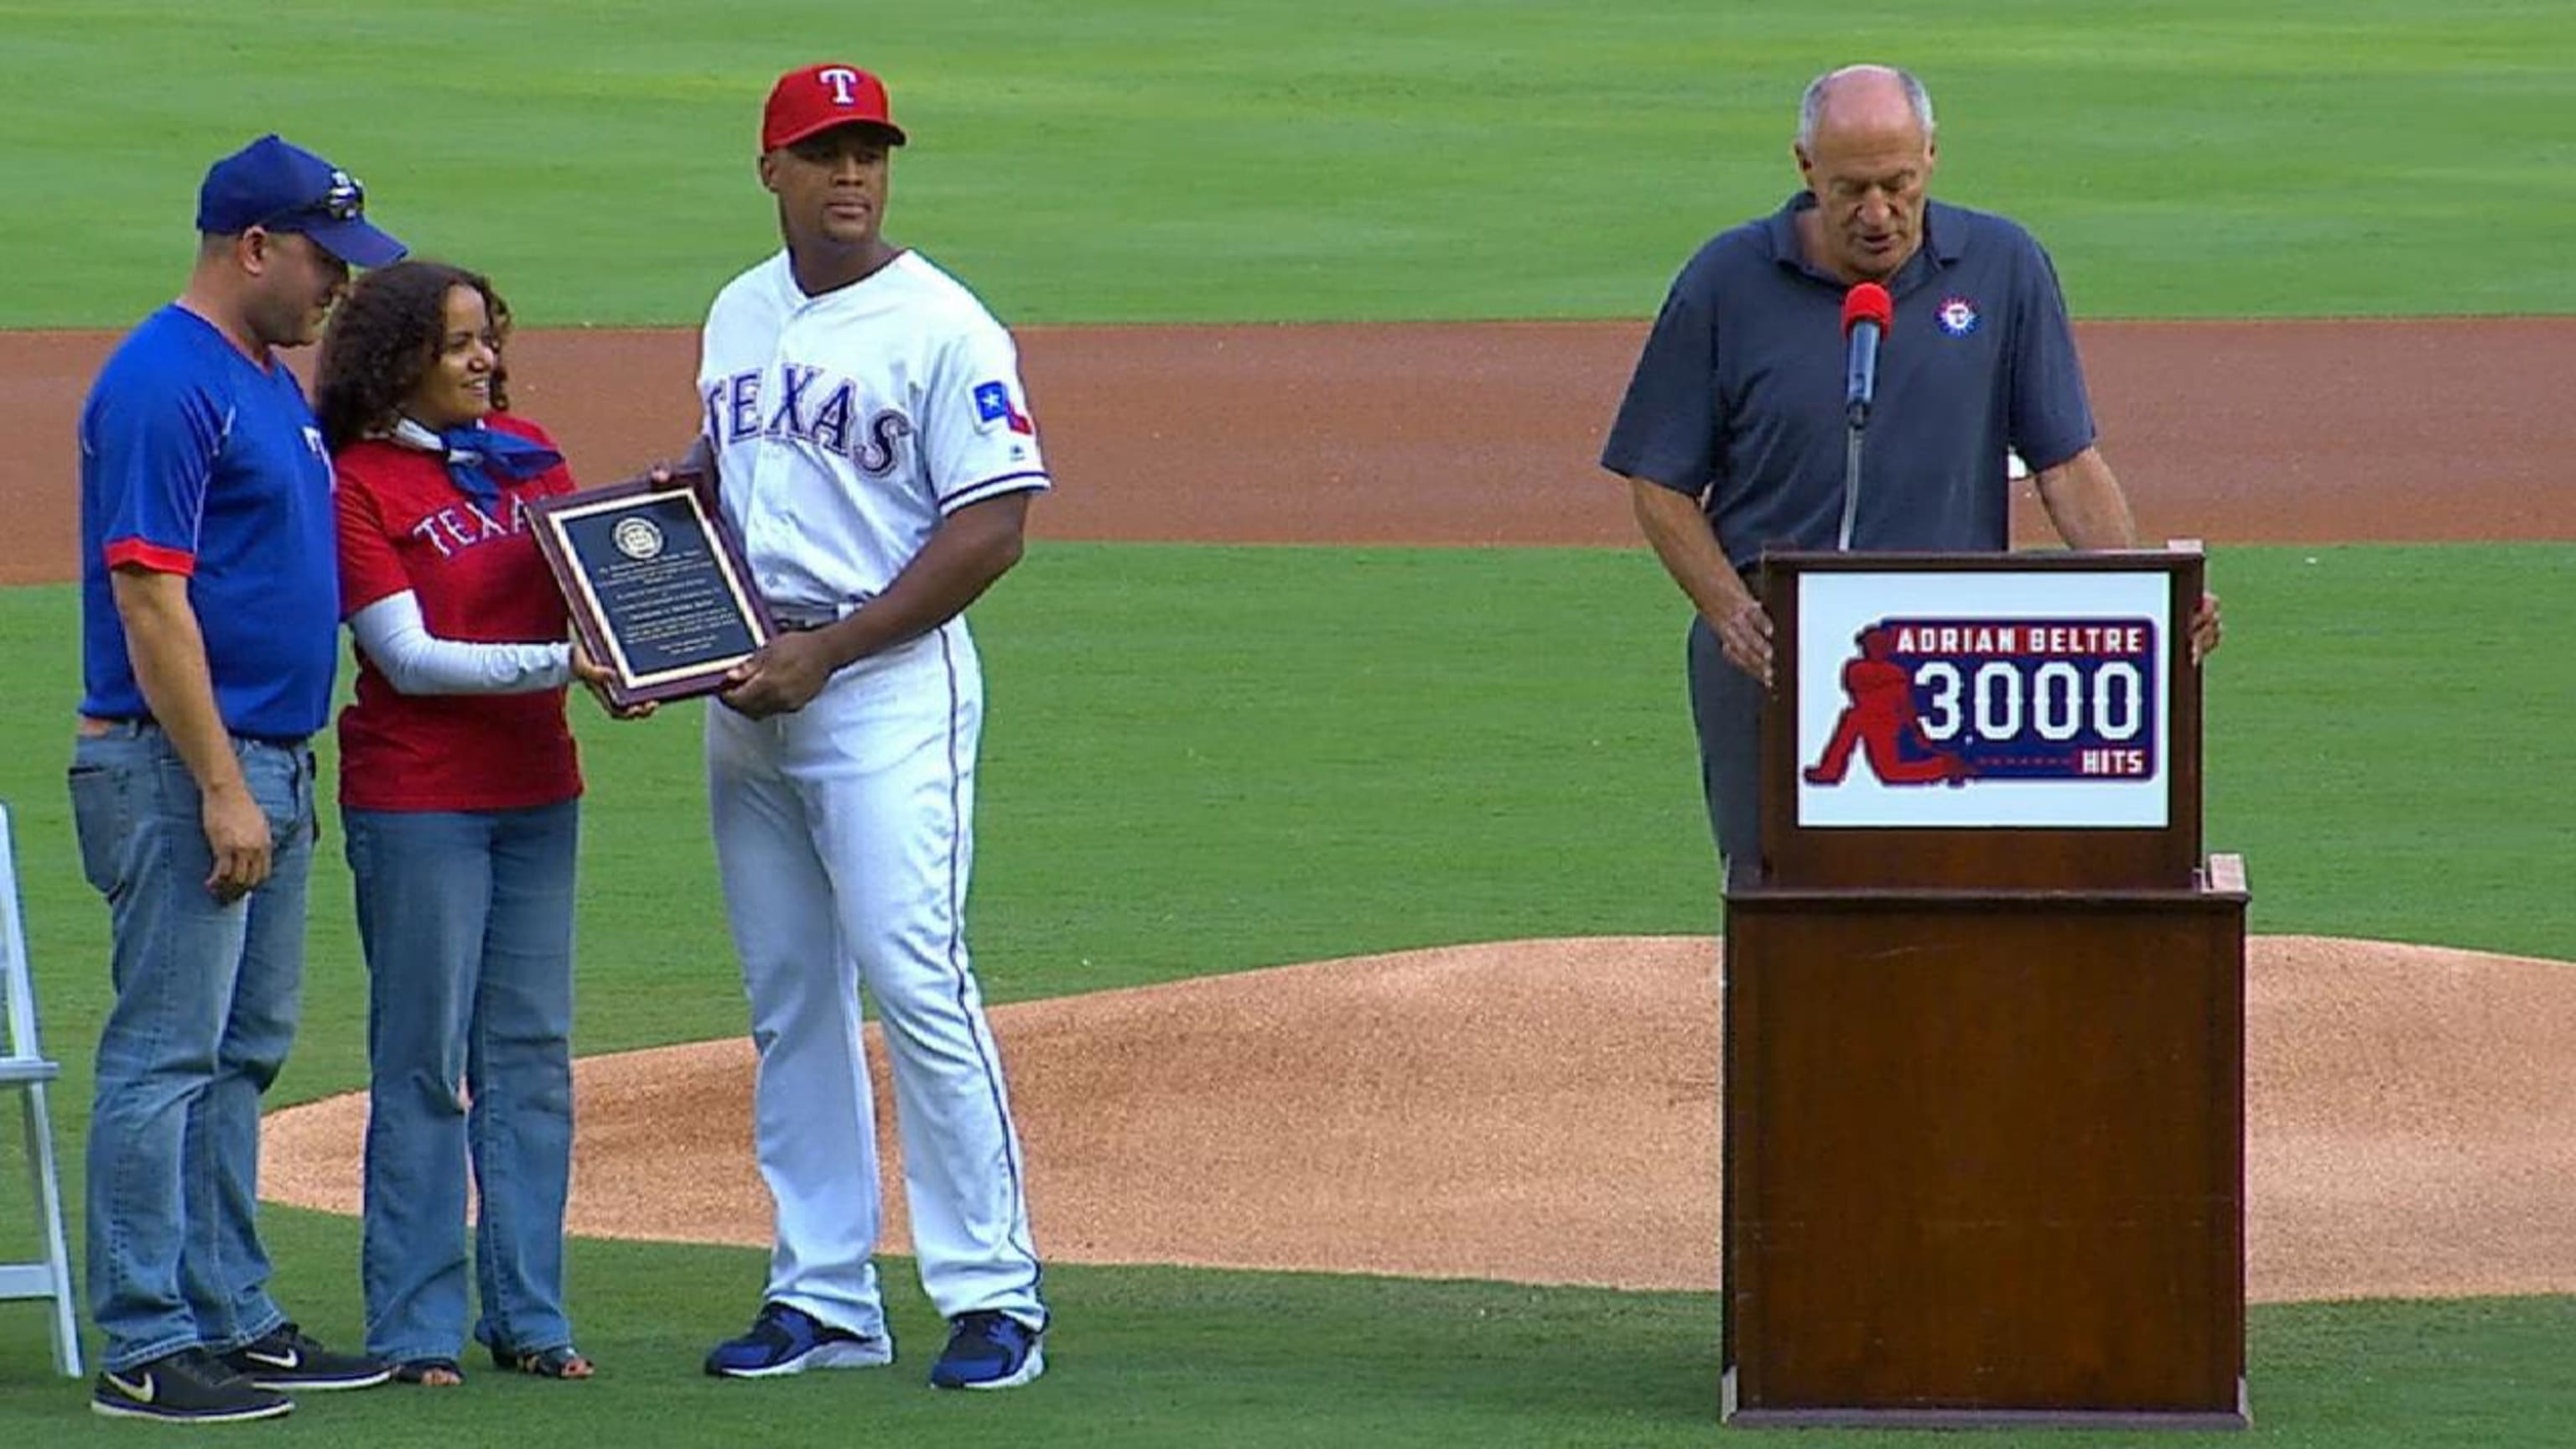 VIDEO: Adrian Beltre collects 3,000th career hit as teammates